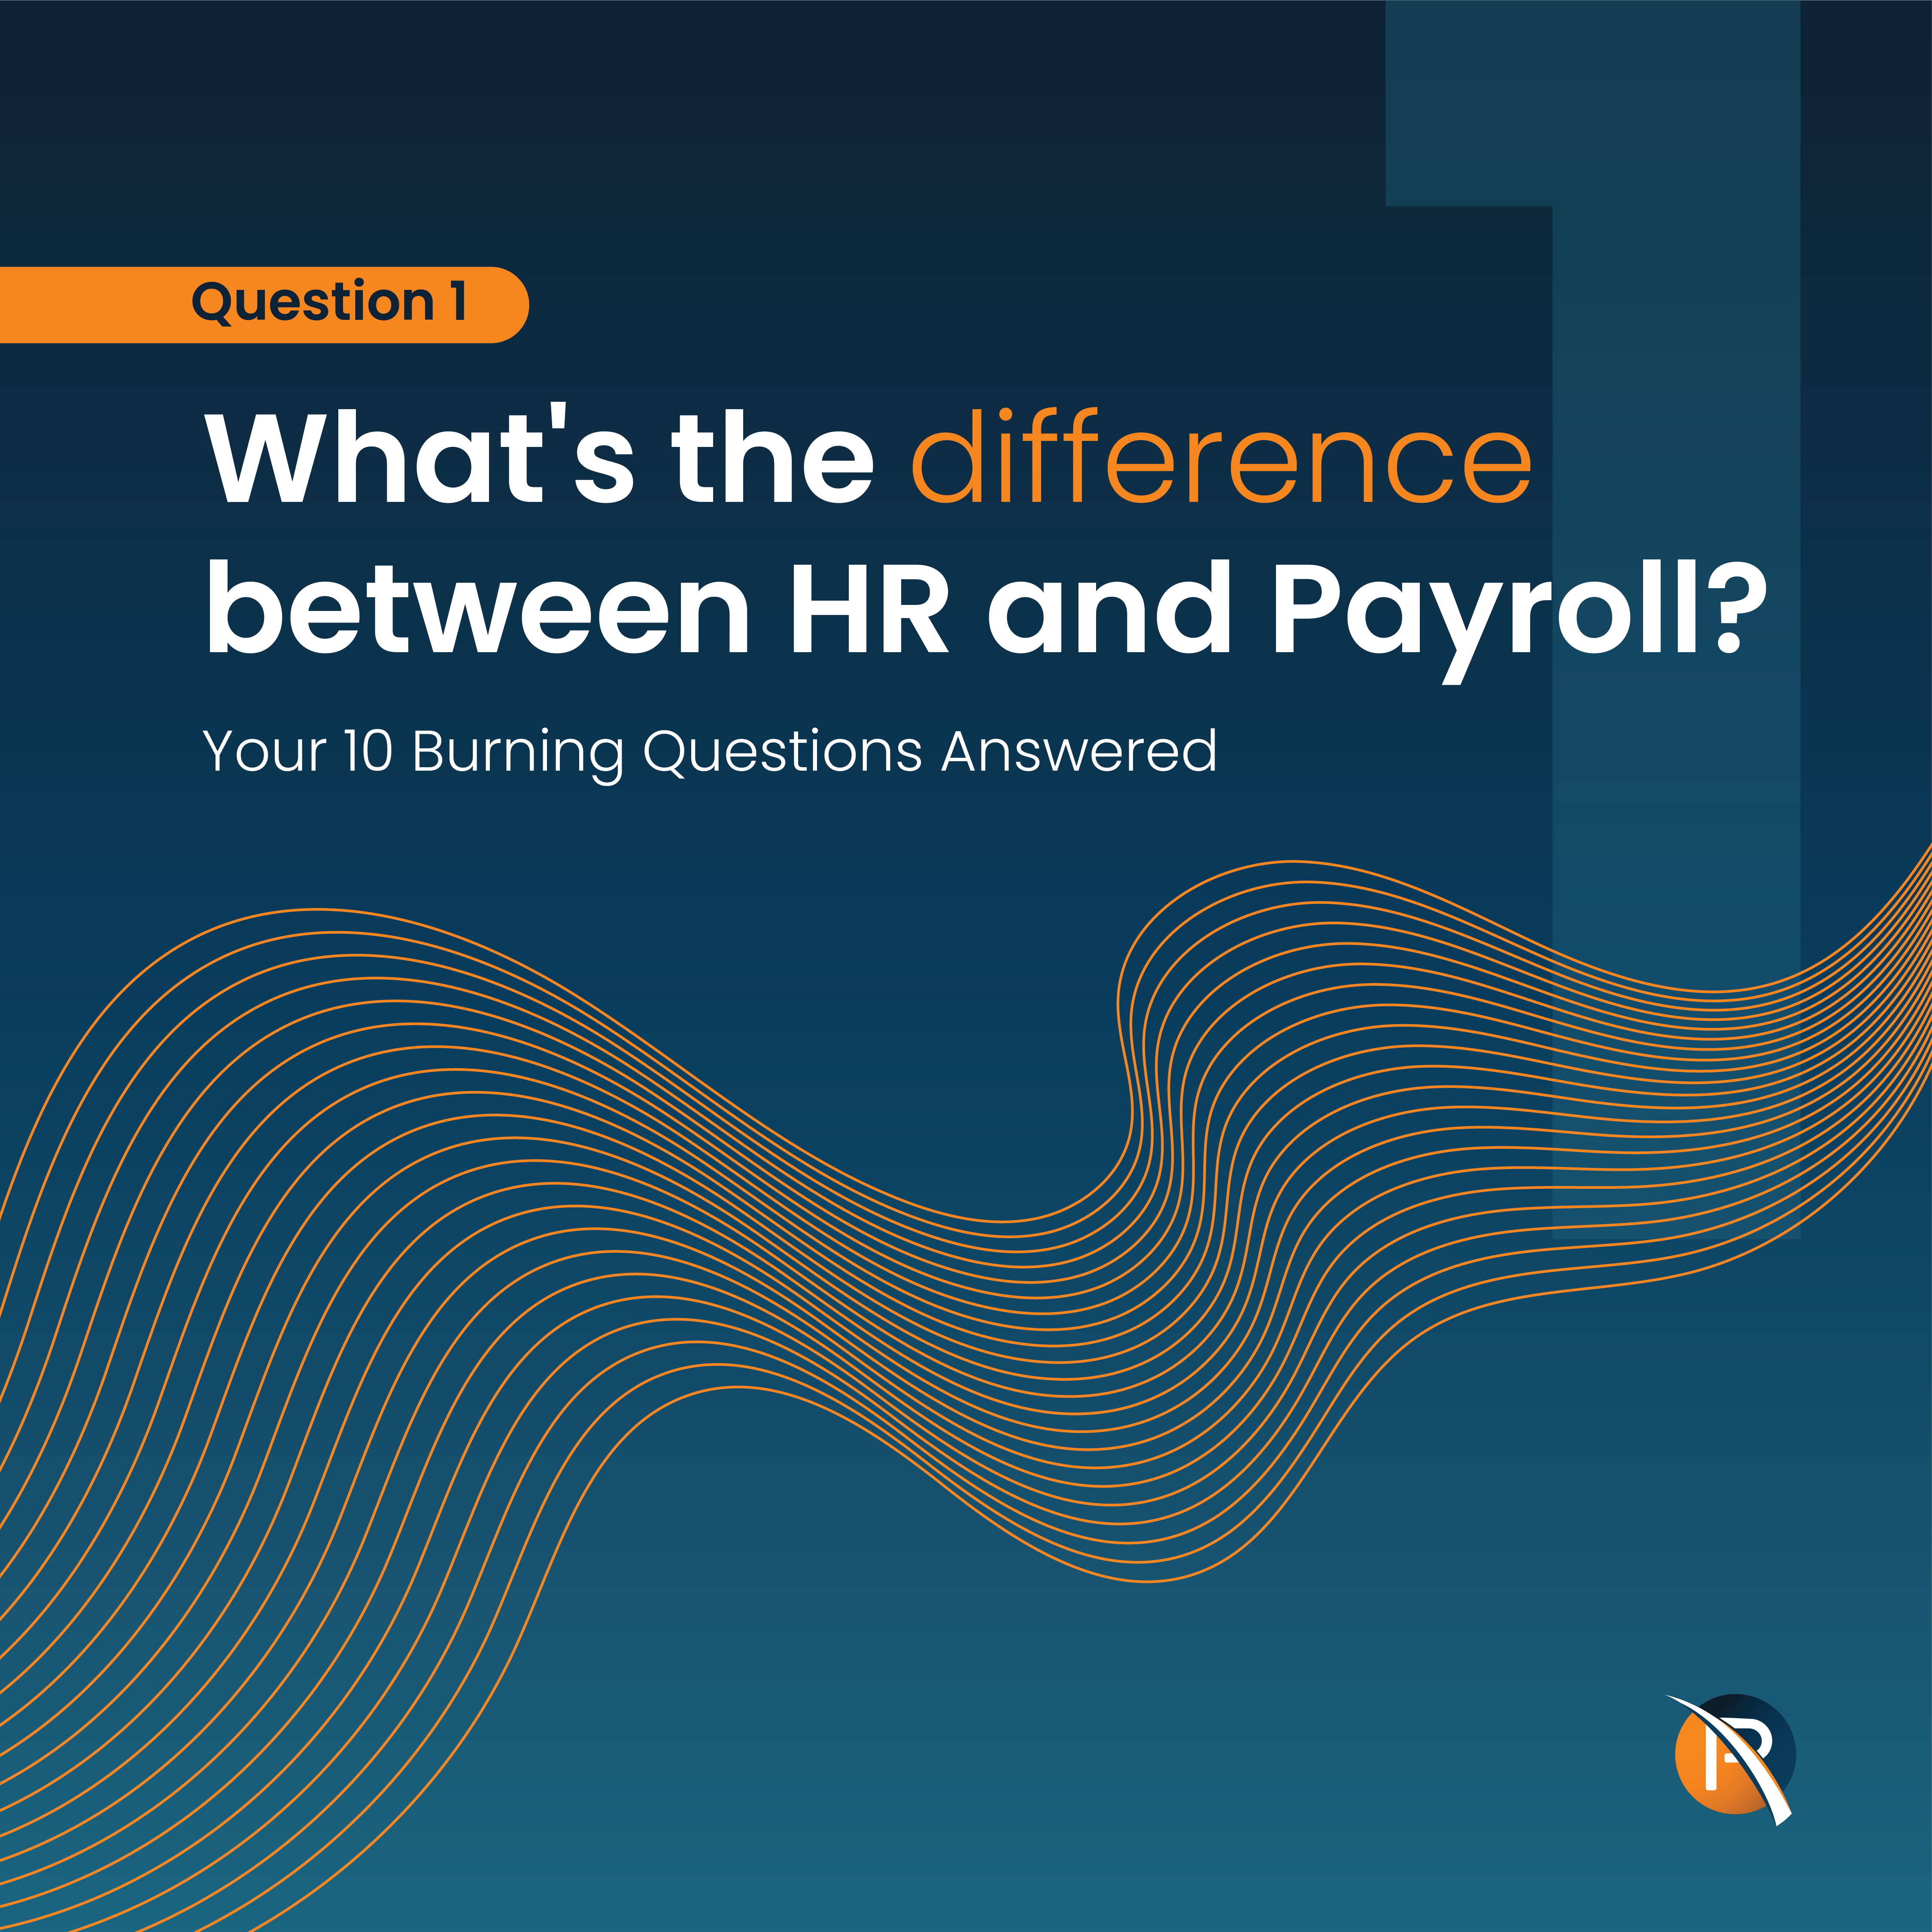 The difference between HR and Payroll